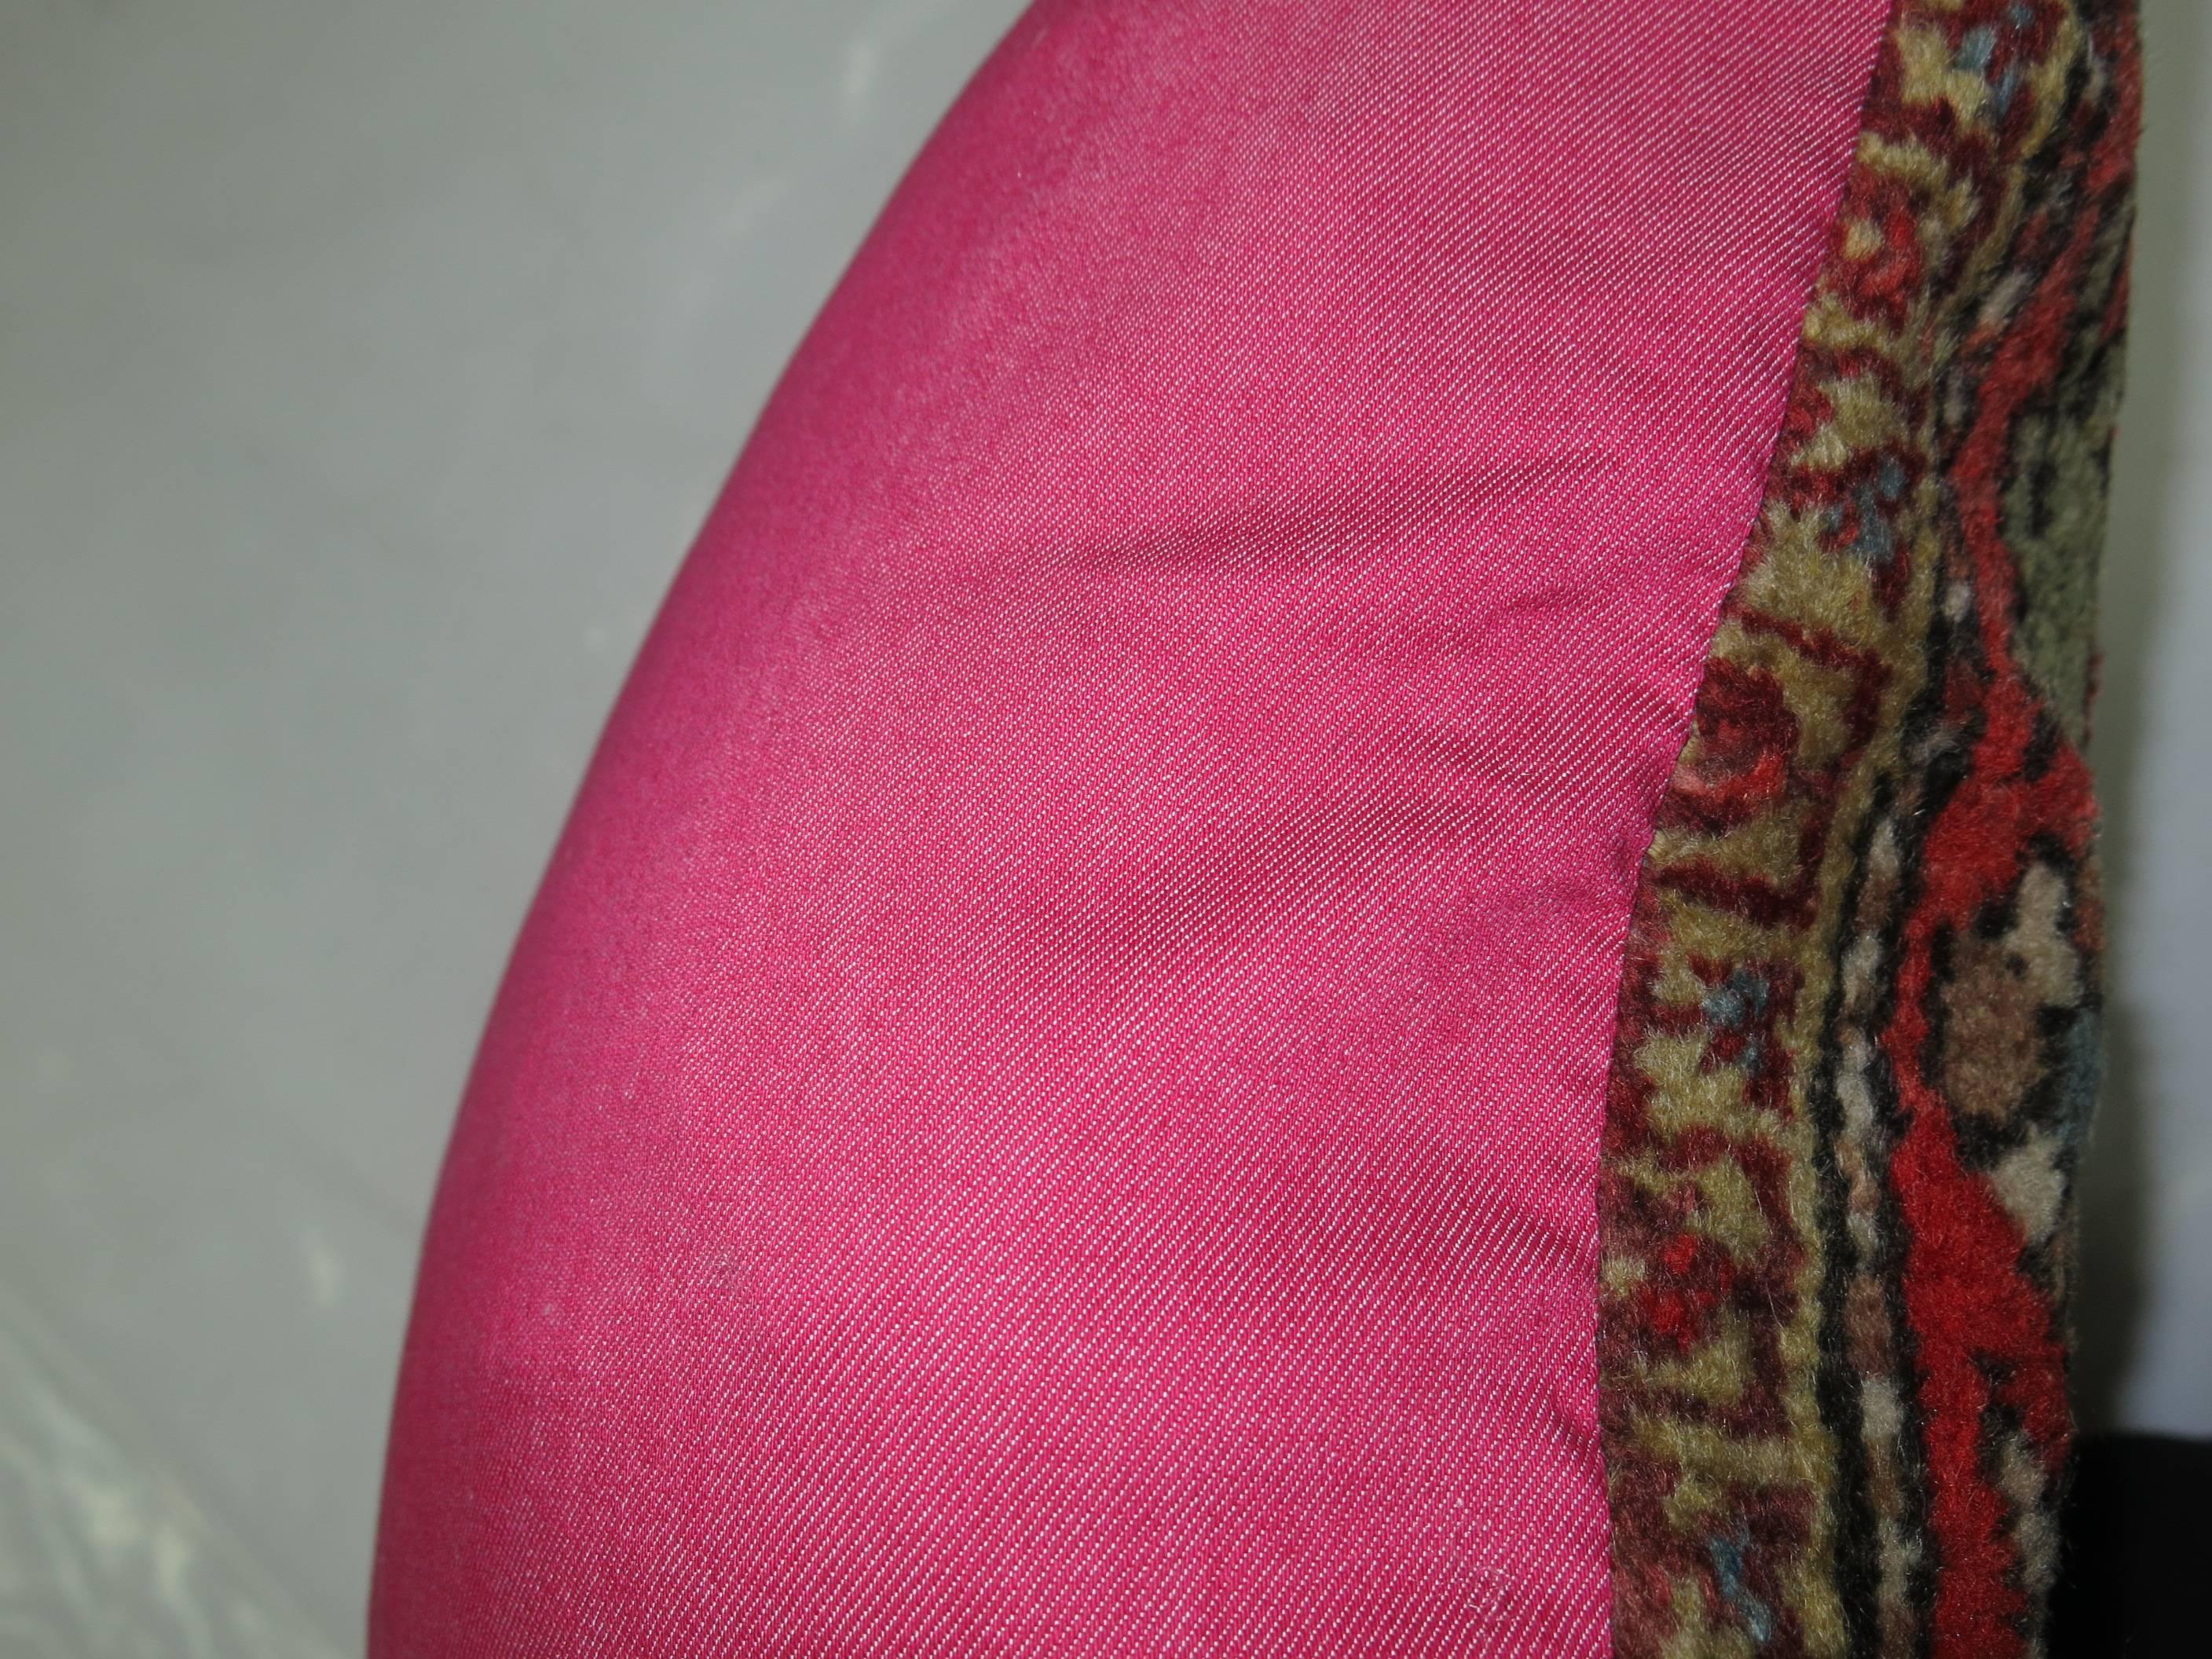 Pillow made from an early 20th century Persian rug backed in bright pink.